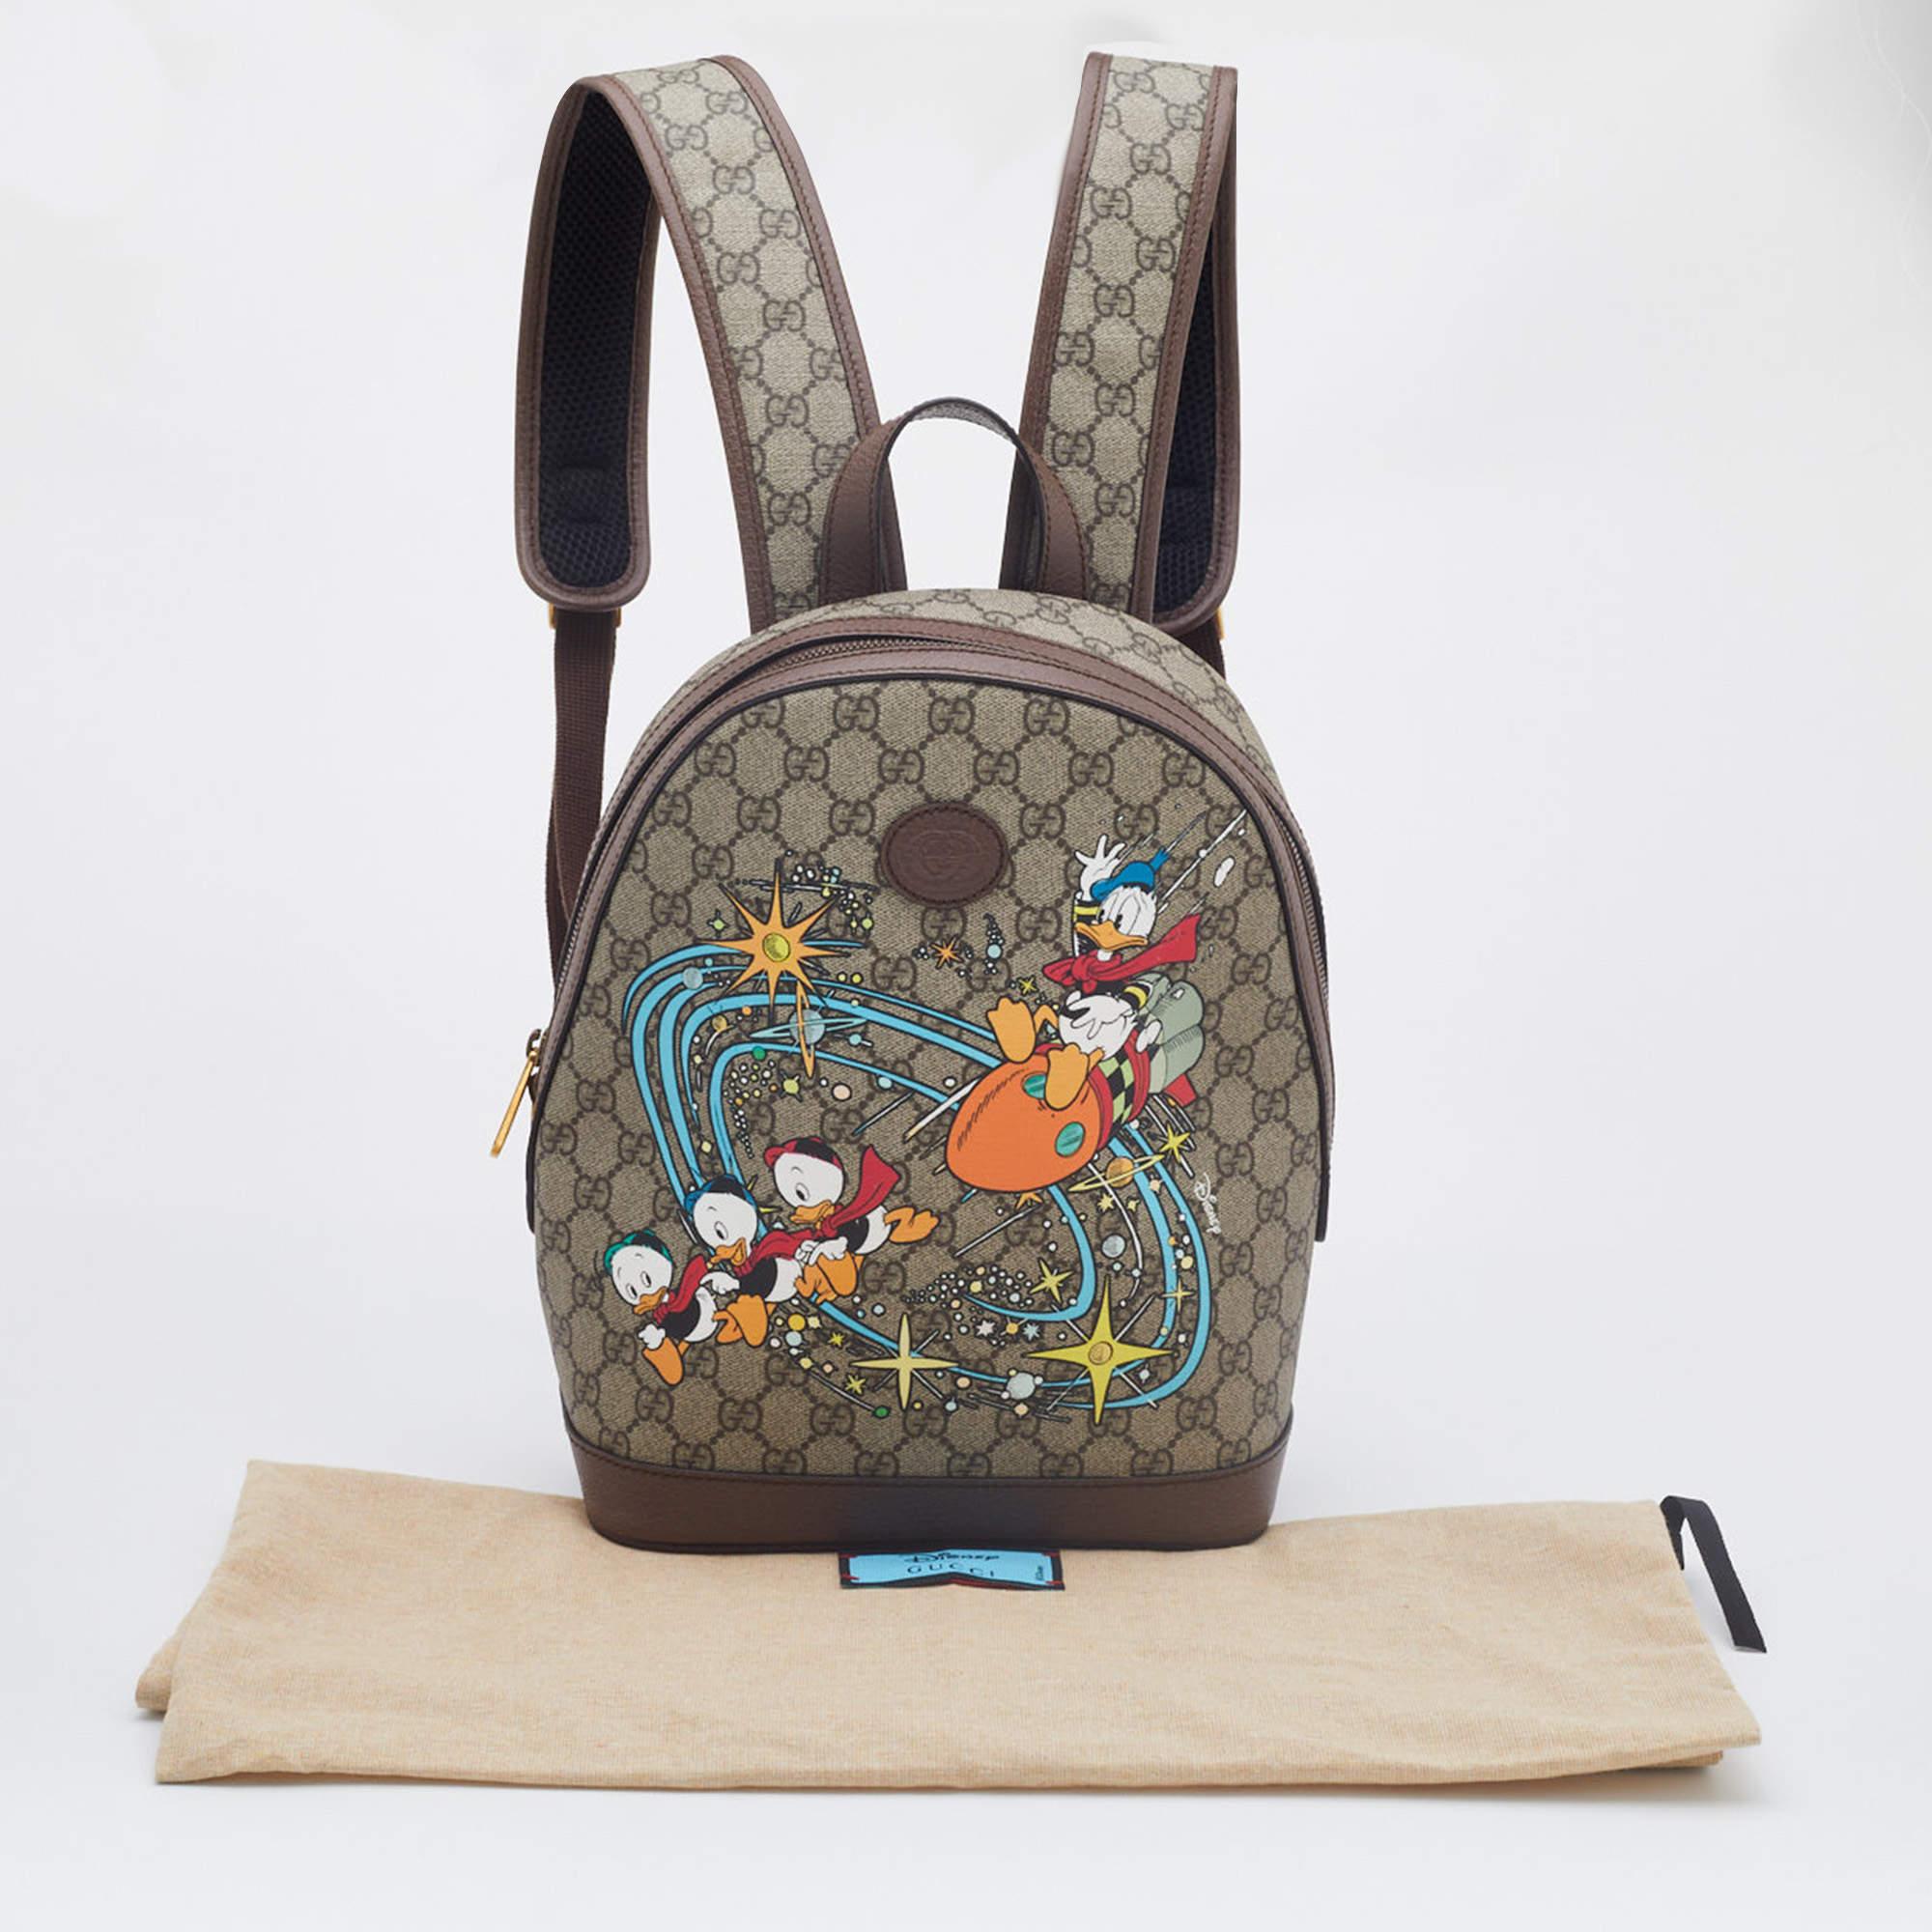 Gucci x Disney Beige GG Supreme Canvas and Leather Donald Duck Backpack 6